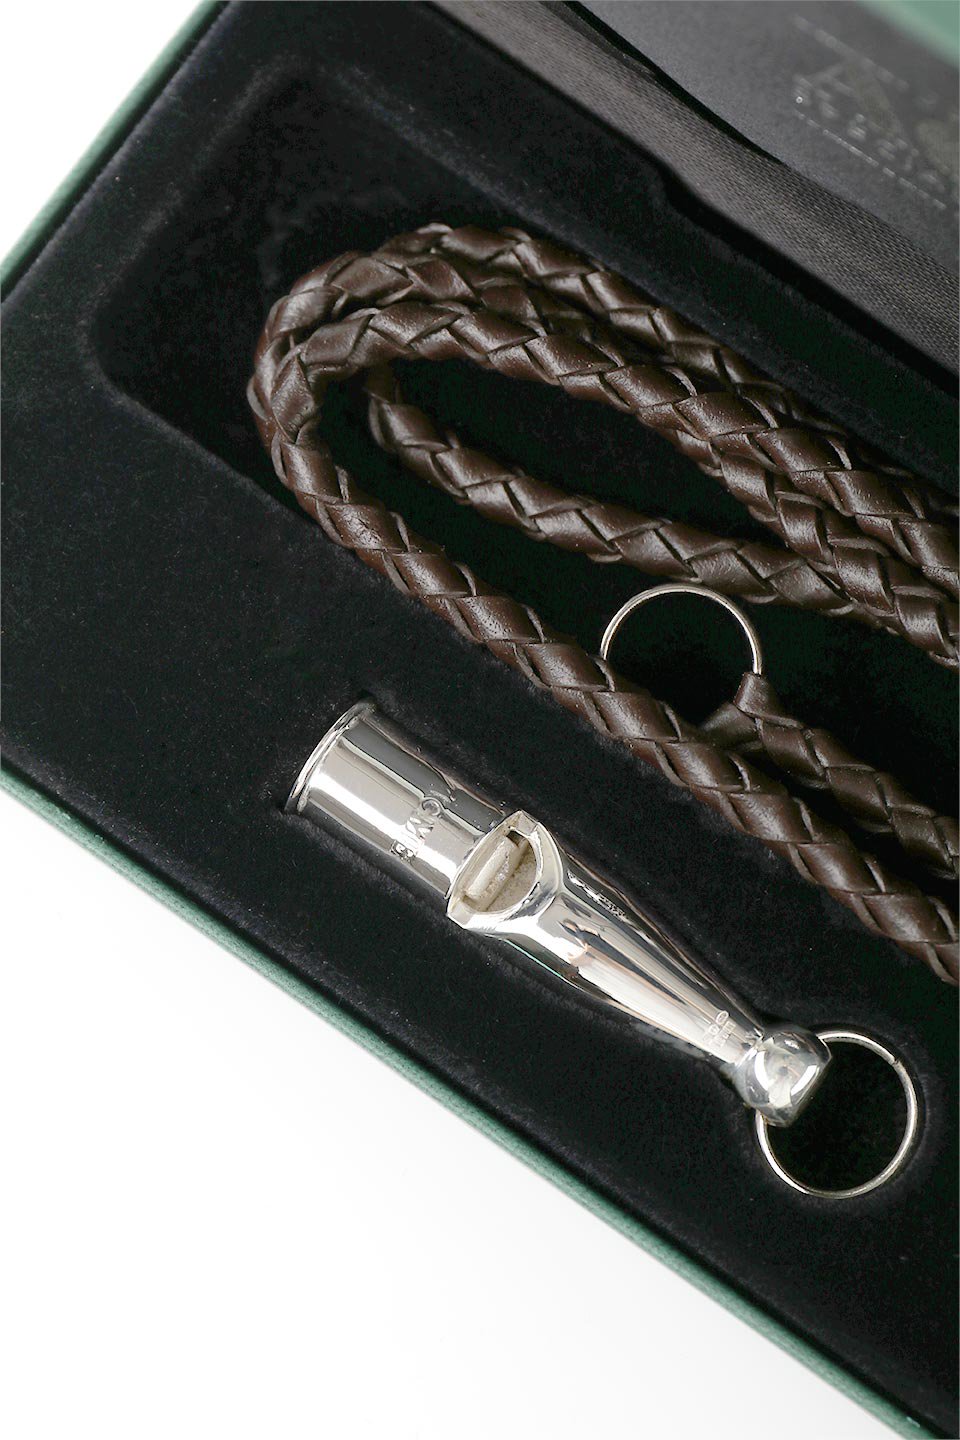 Acme Dog Whistle Pro Trialler (Silver) アクメ・ドッグホイッスル・プロトライアラー（純銀製） / Acme